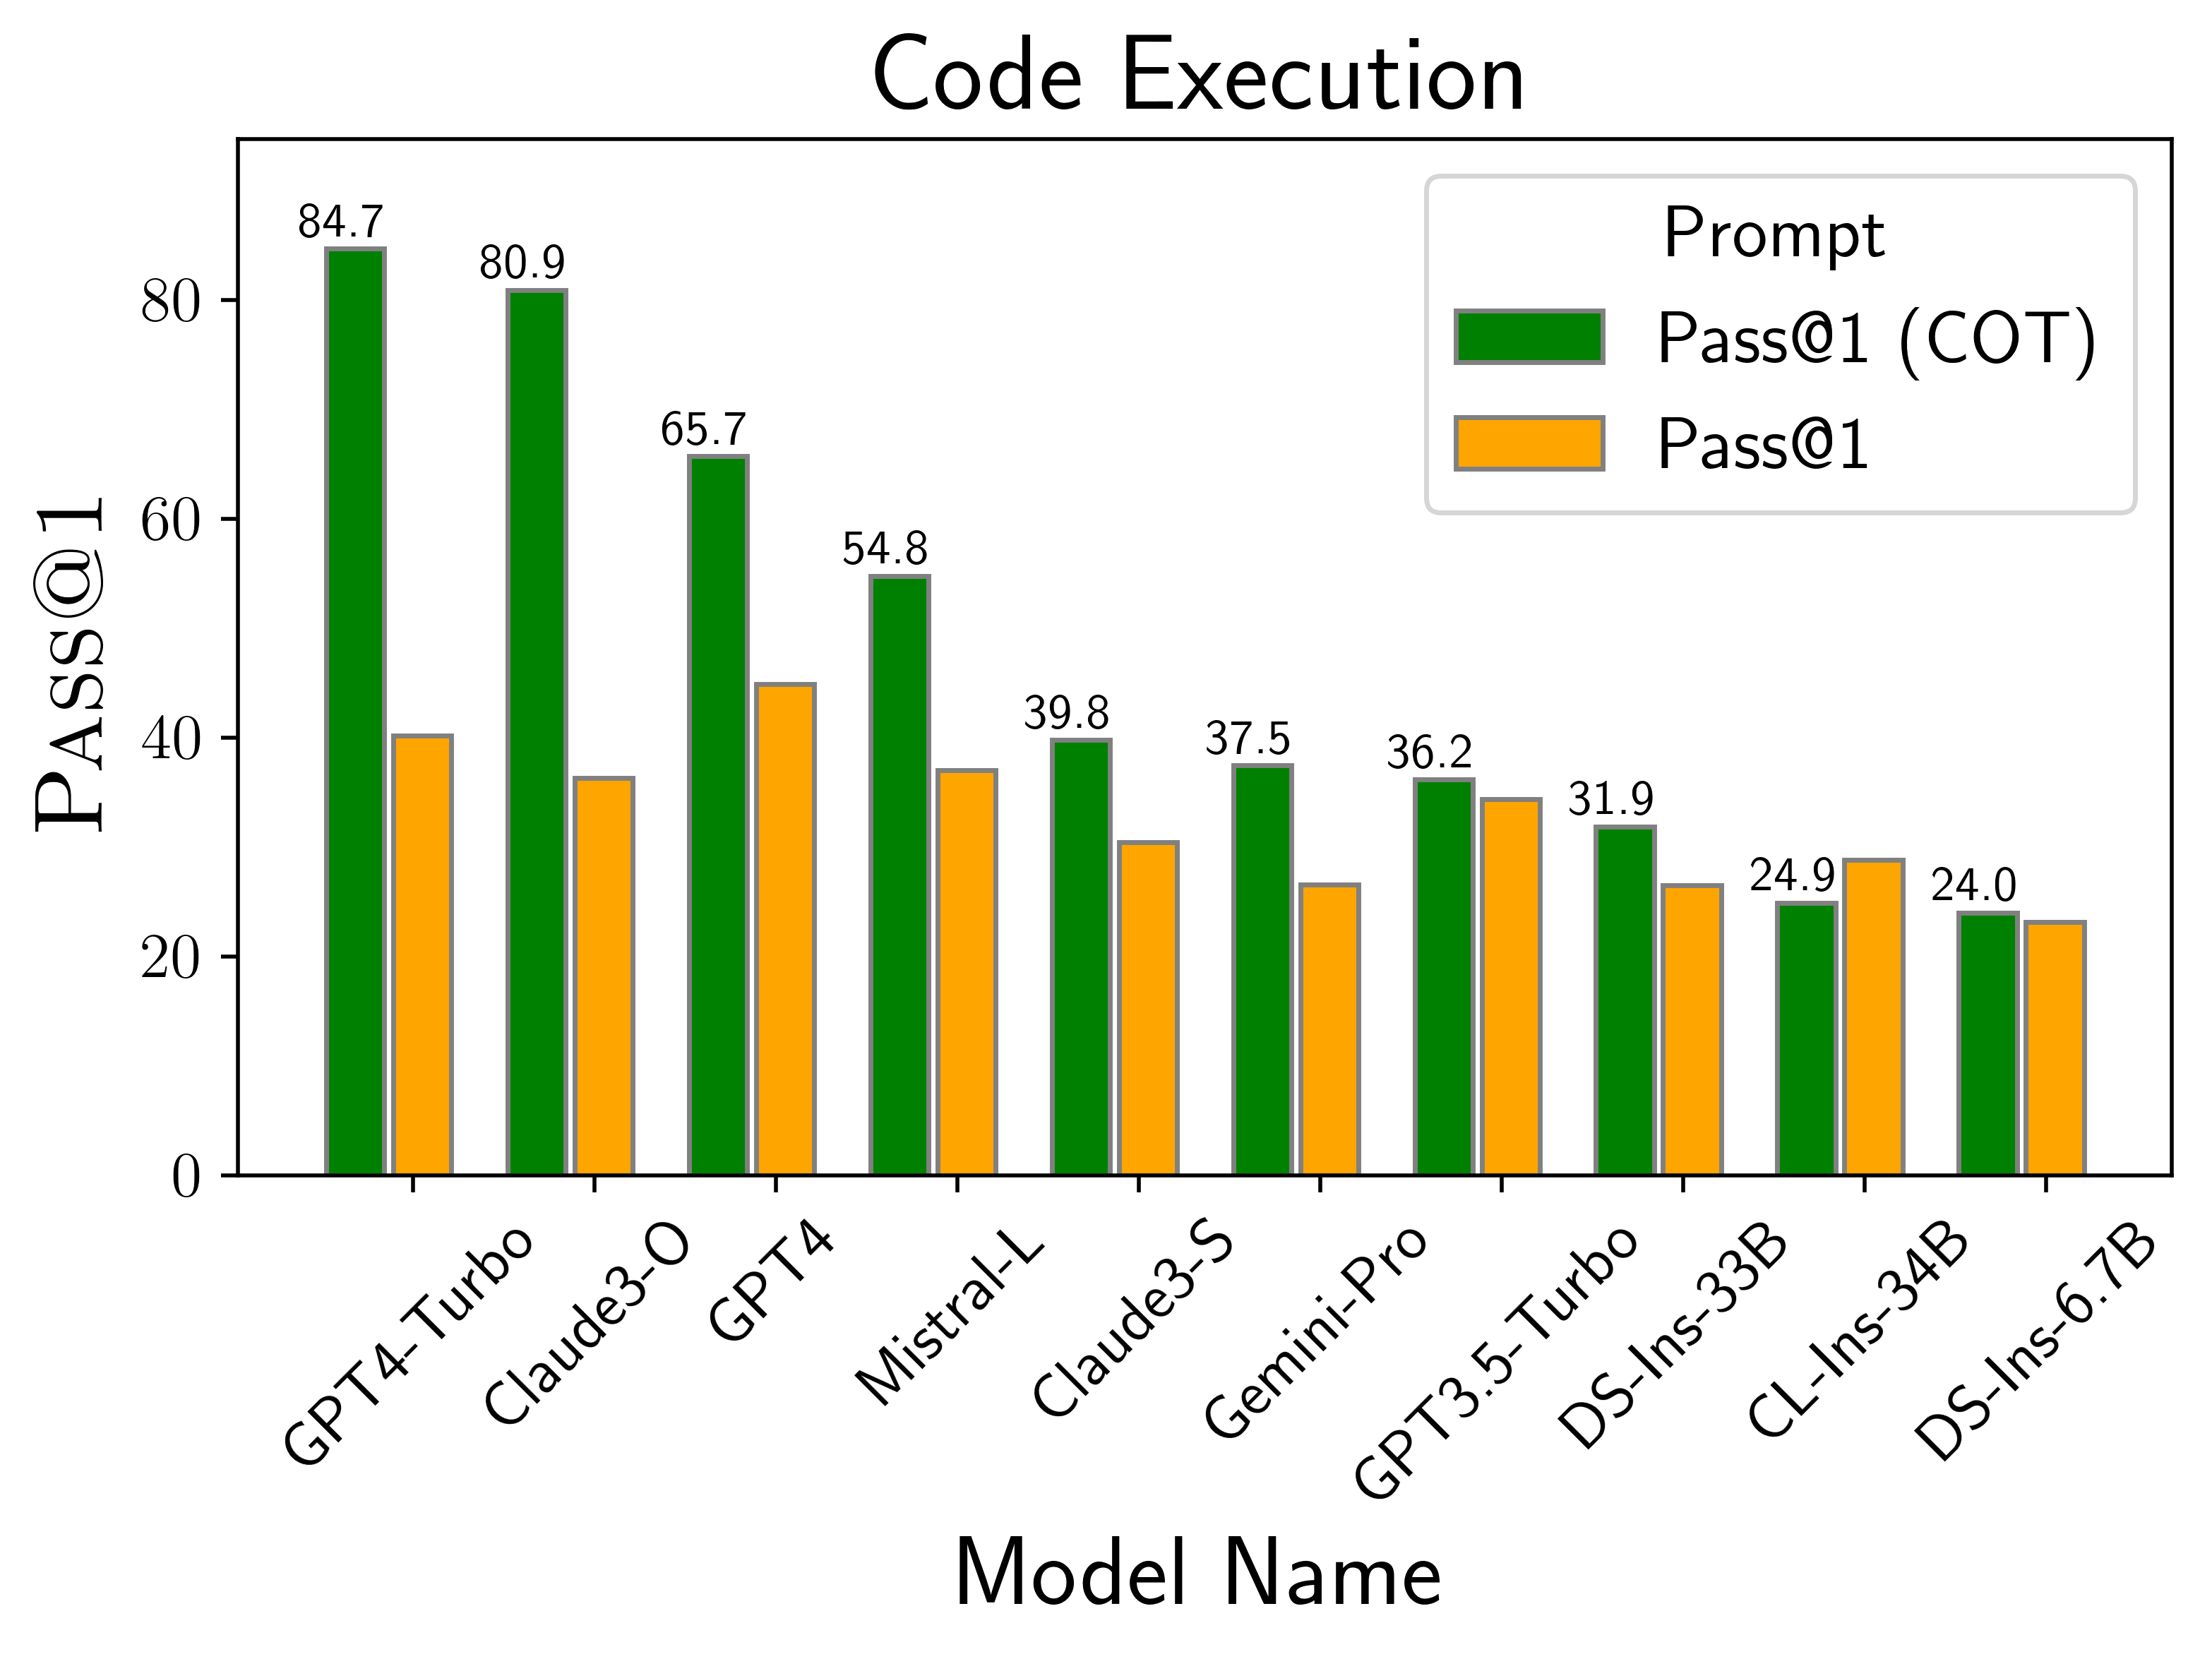 Code Execution Performance